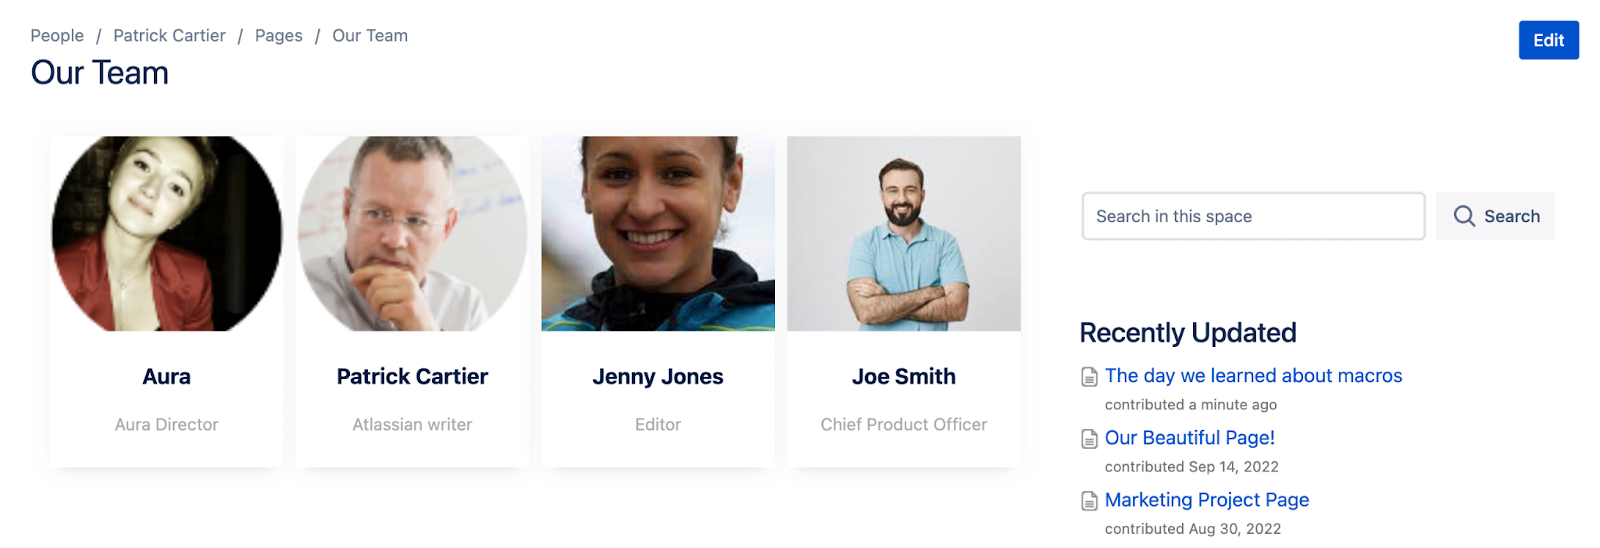 Making a People-centric Confluence Page - Aura Cards used on team page